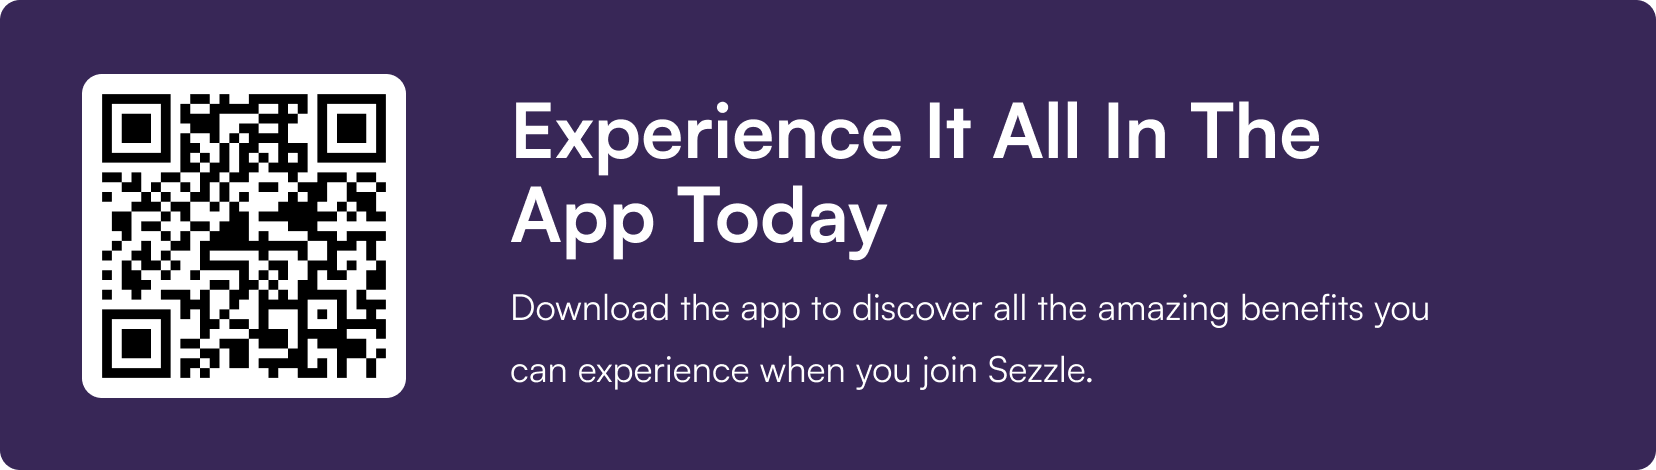 Get the Best Experience. Download the Sezzle App. Get the App.